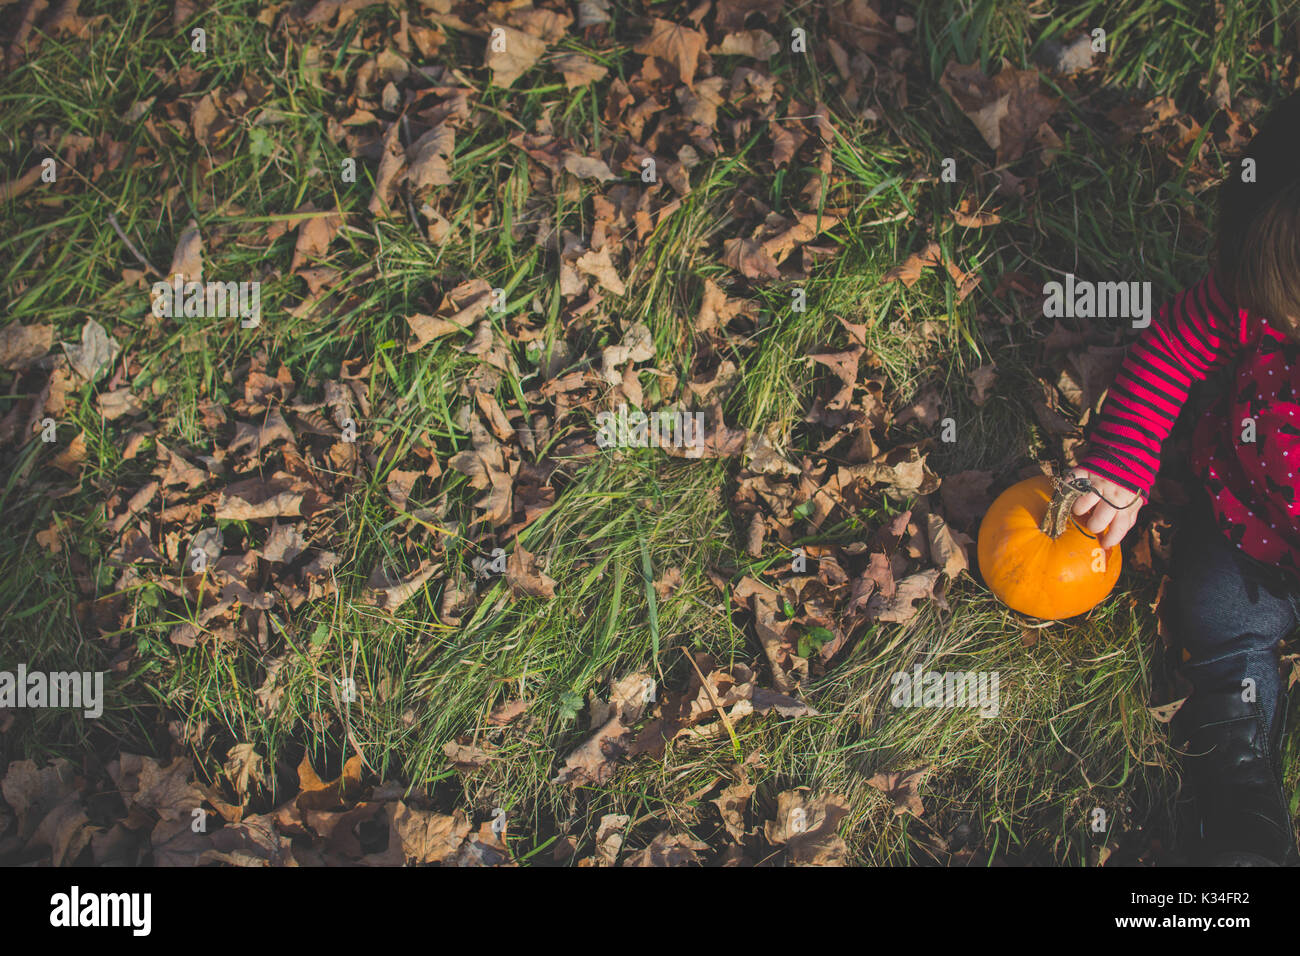 A baby sits in Fall leaves with her hand on a small pumpkin. Stock Photo